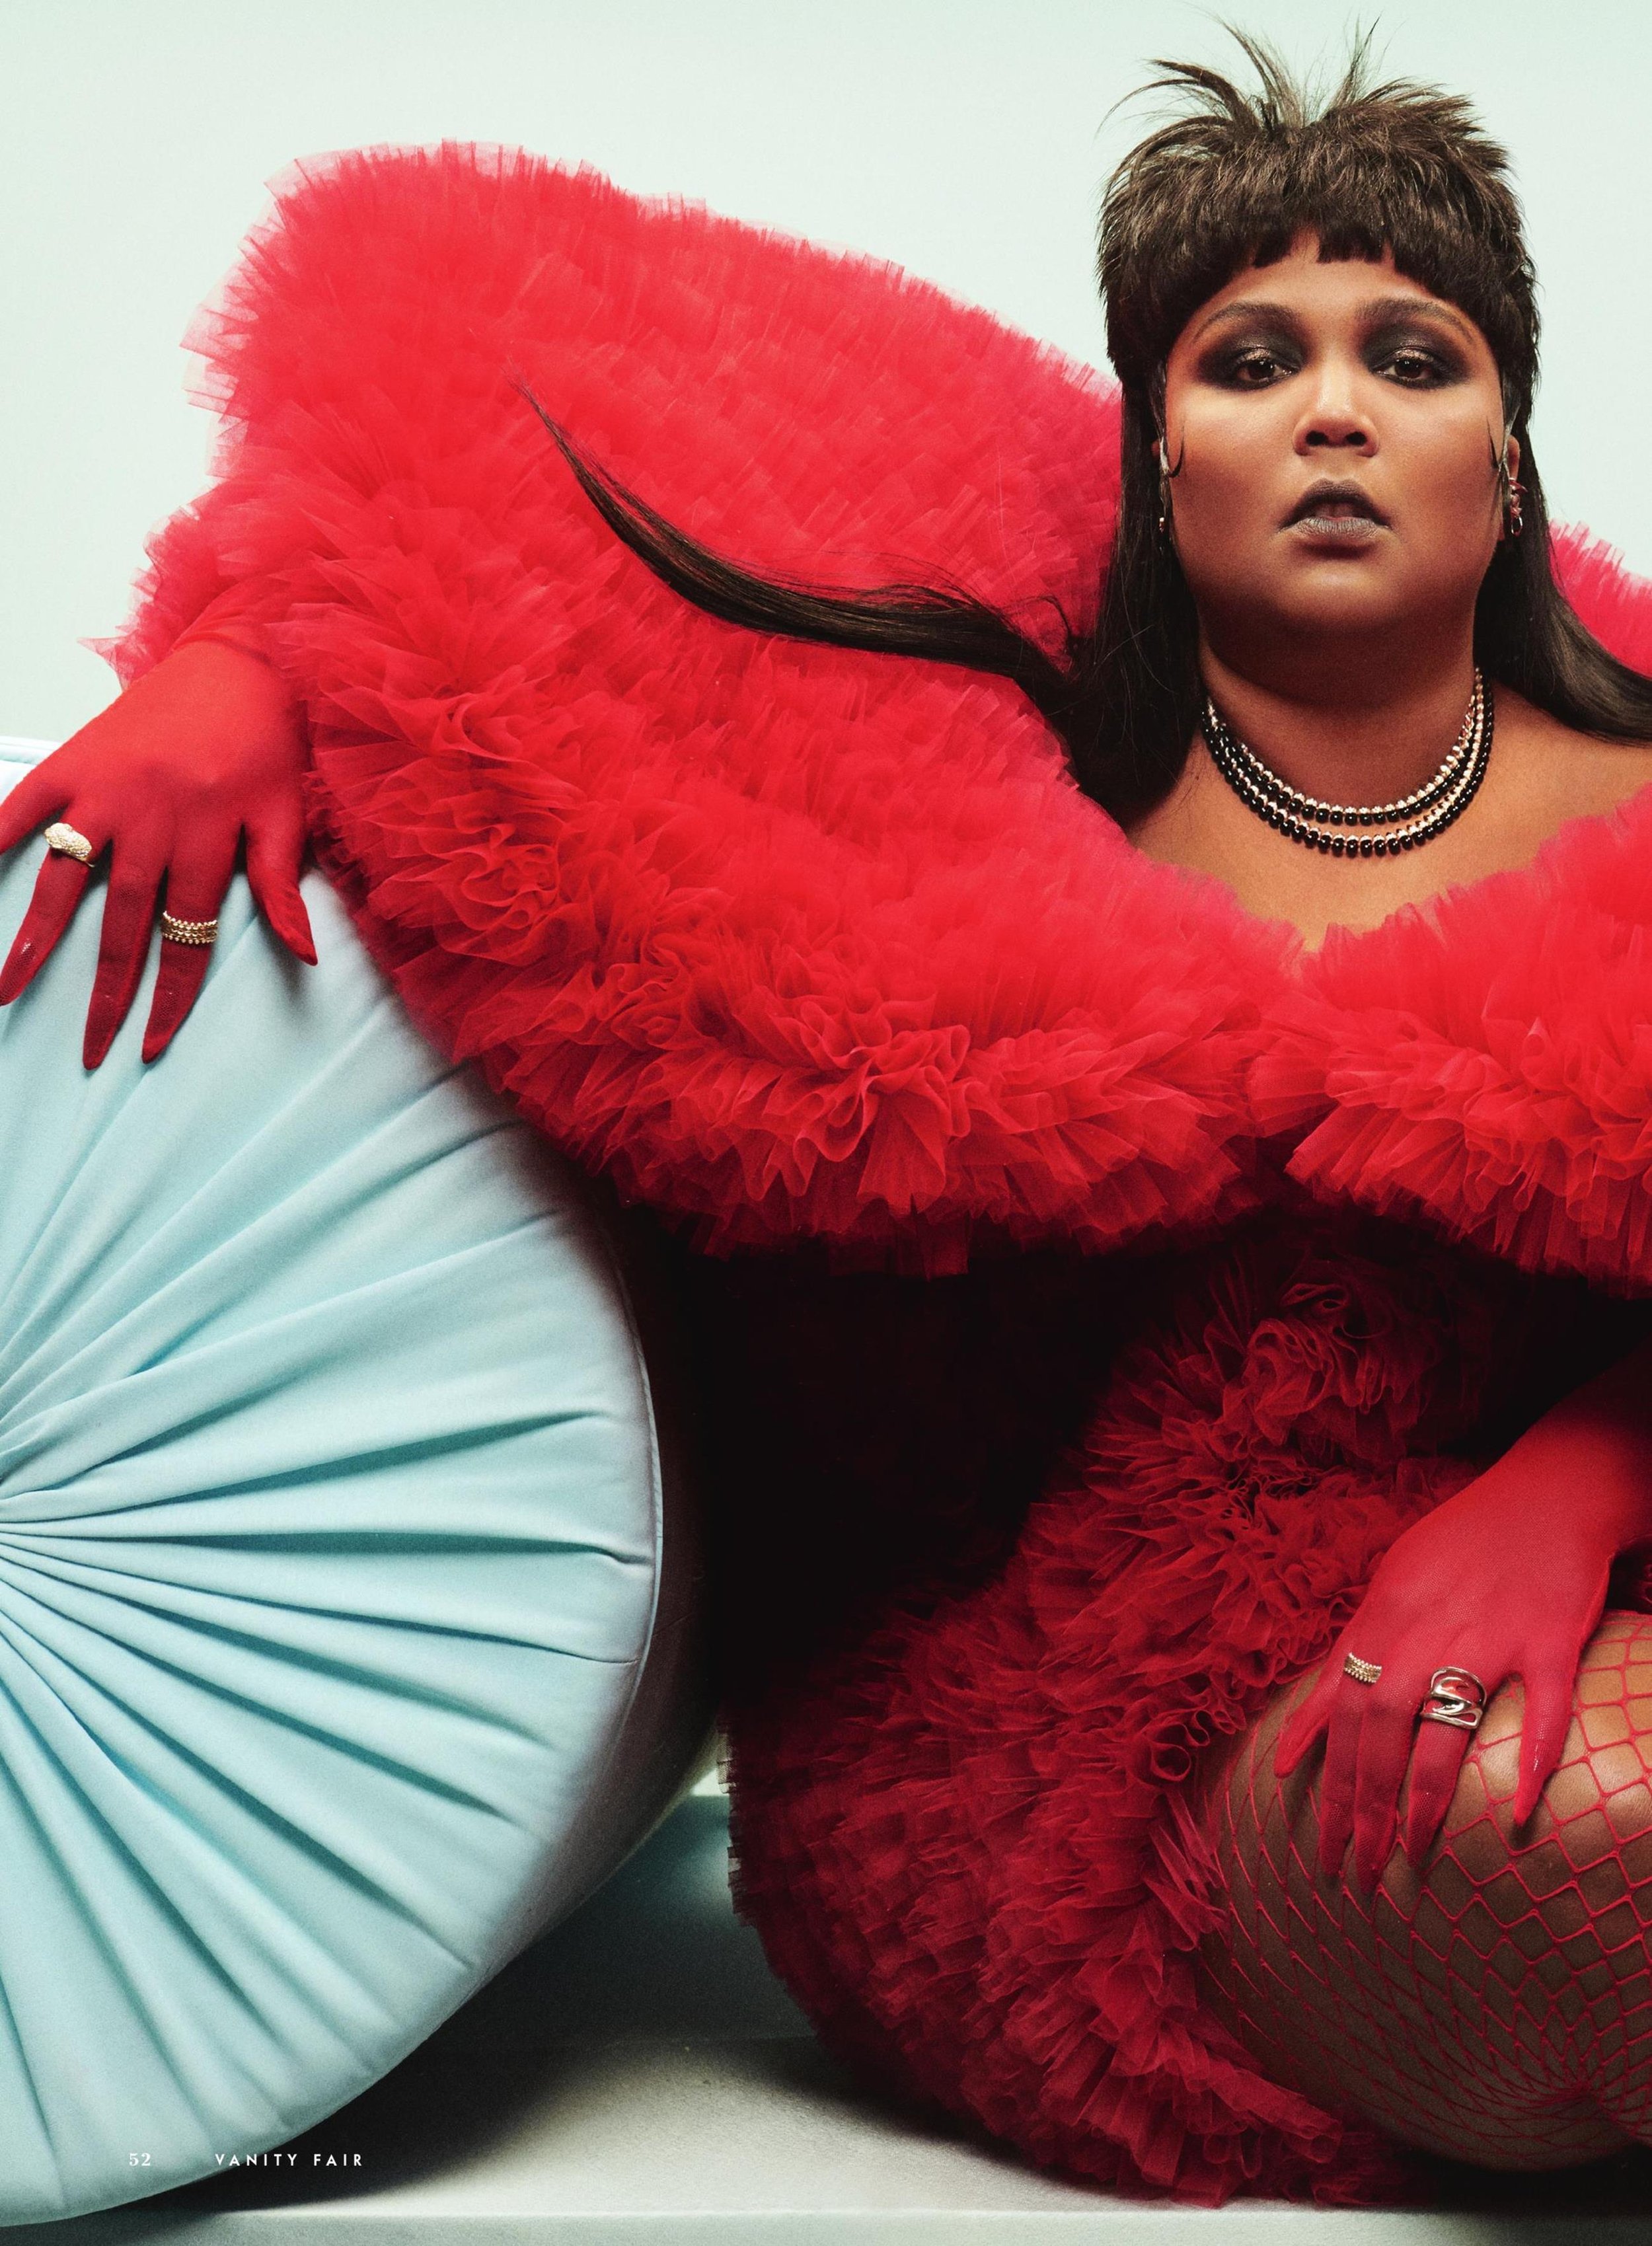 Lizzo-by-Campbell-Addy-for-Vanity Fair-US-00003.jpeg